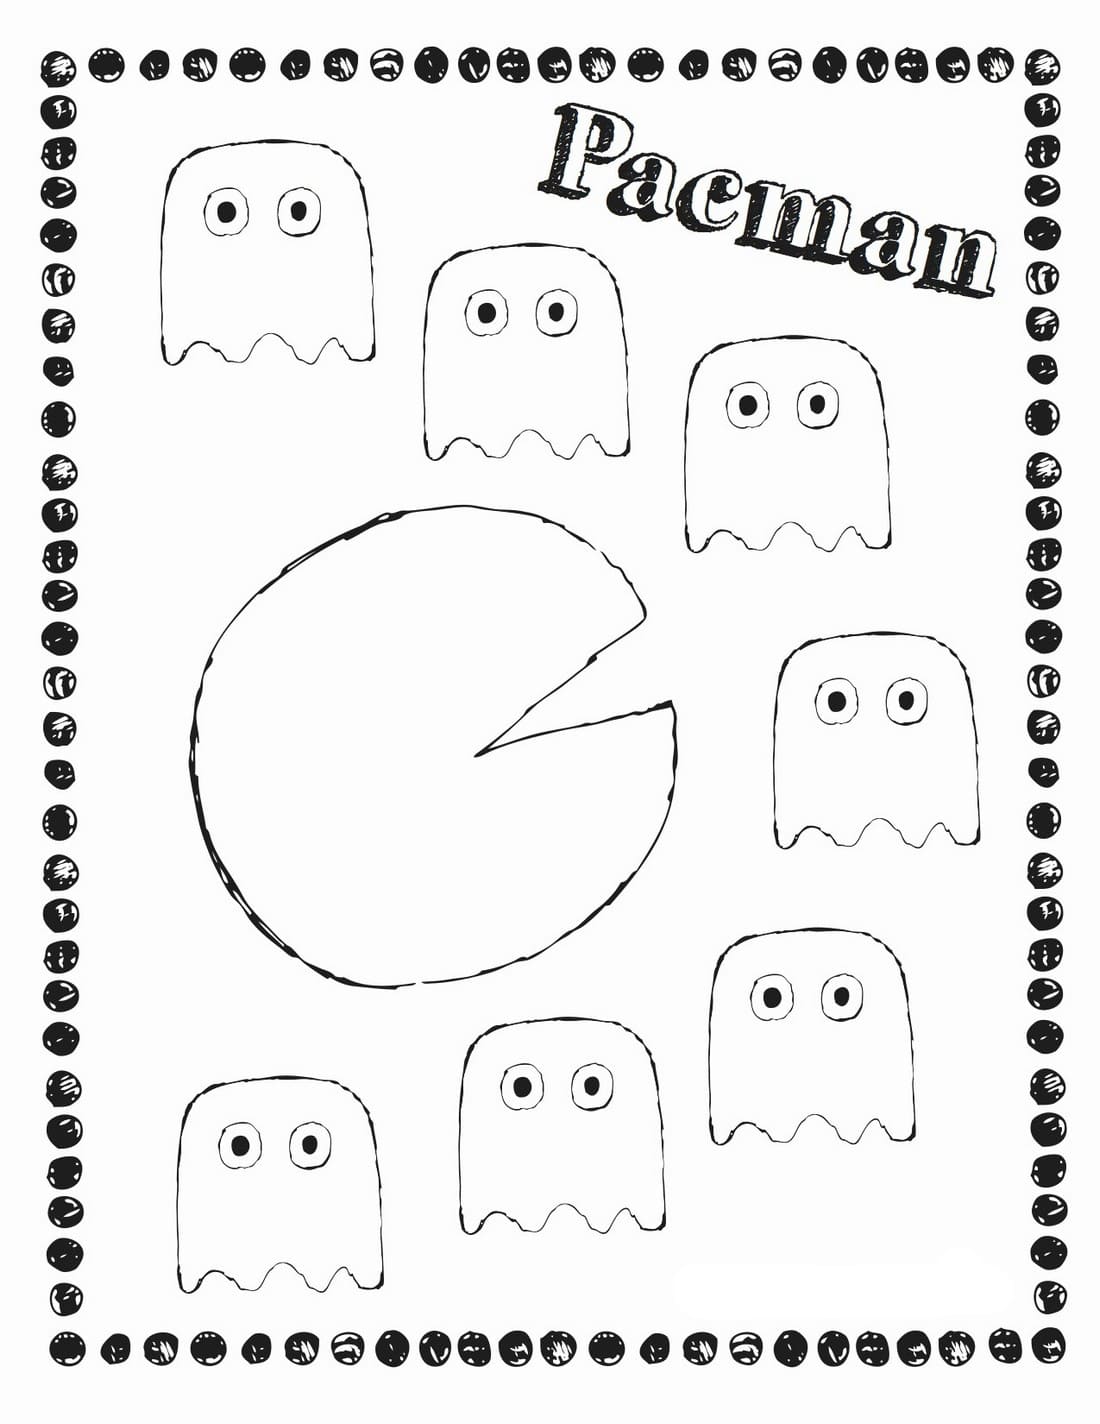 Some Pacman Character Coloring Page